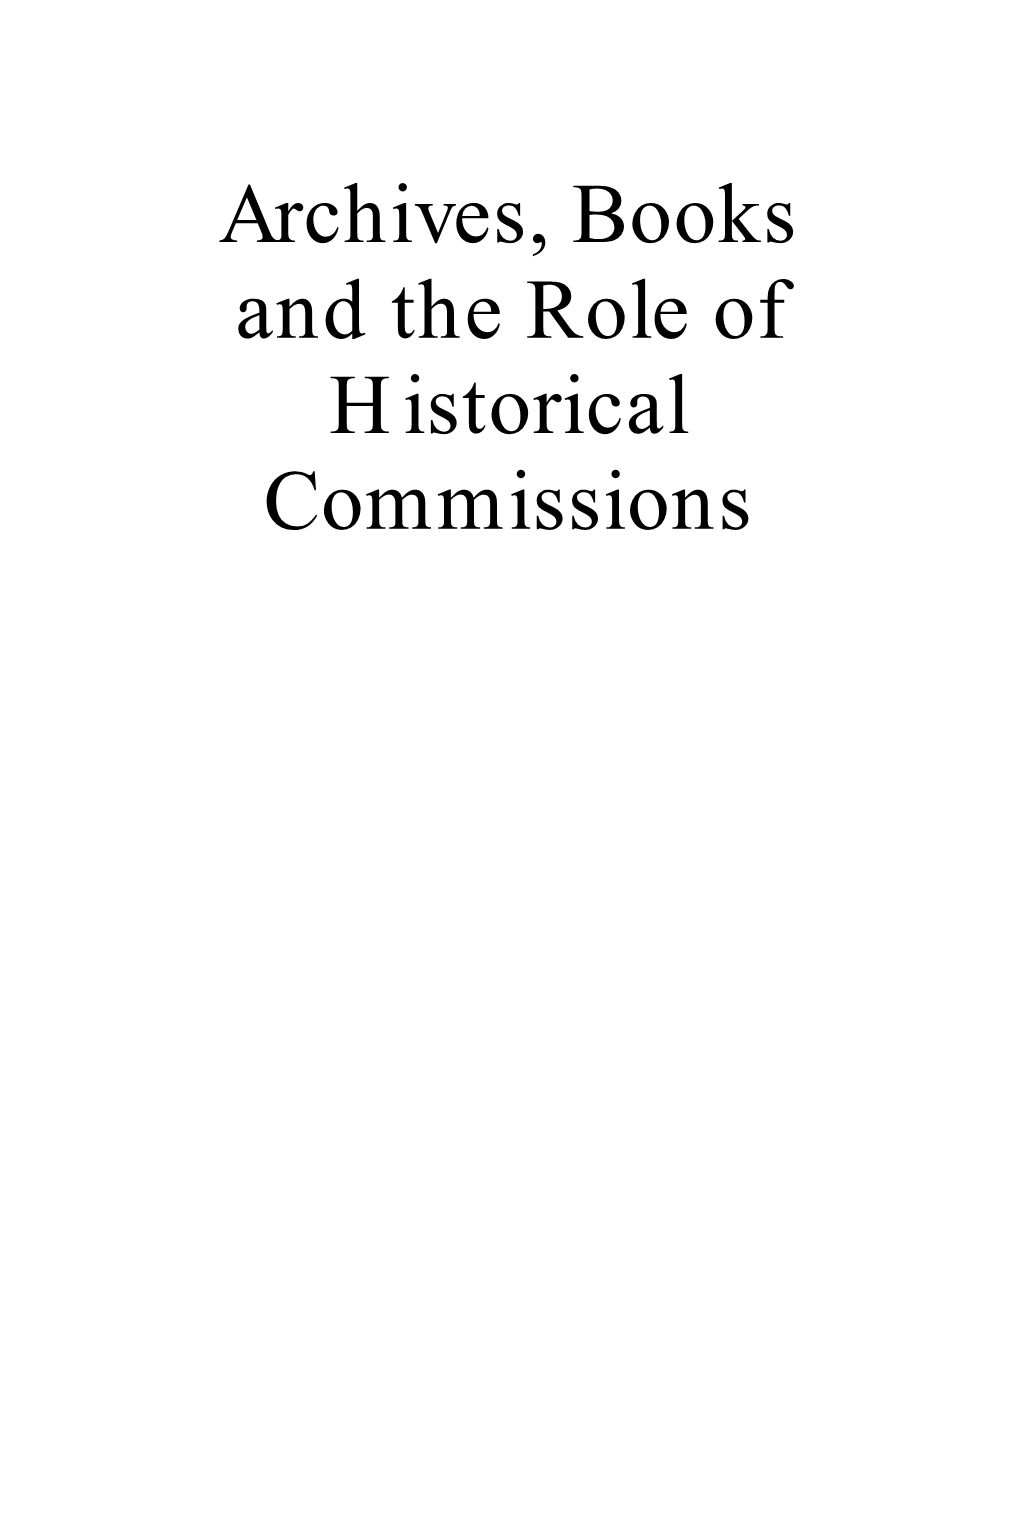 Archives, Books and the Role of Historical Commissions